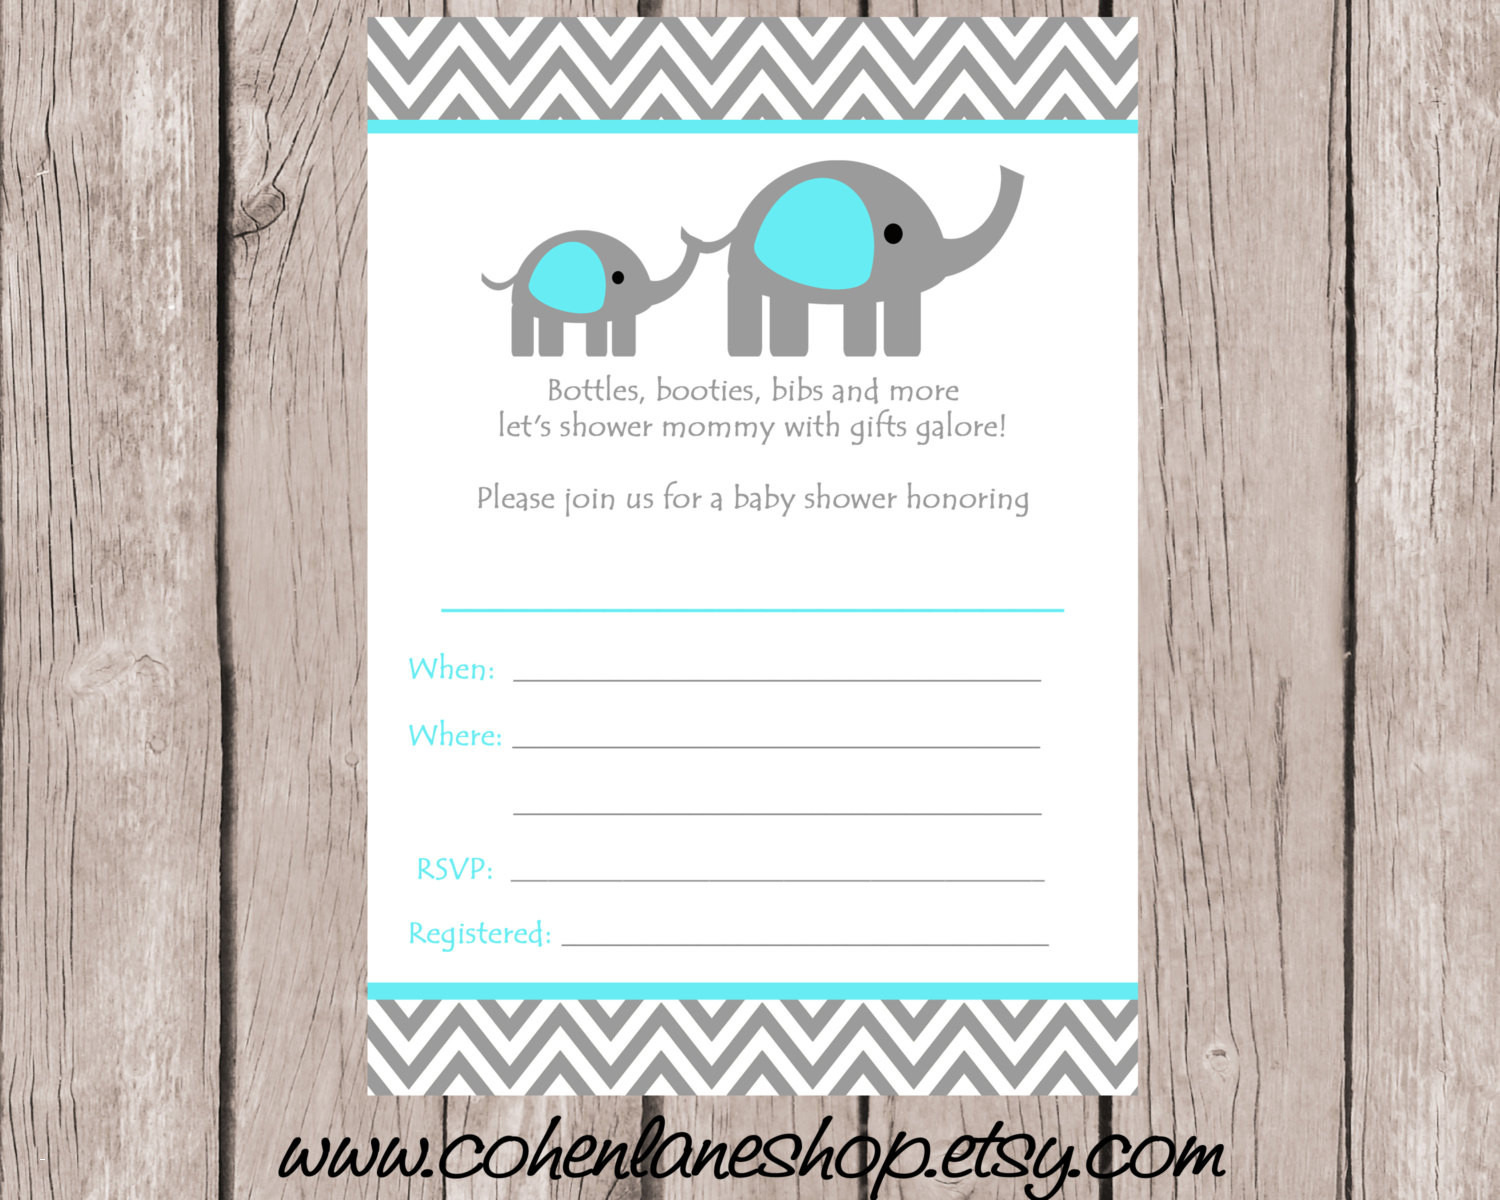 Full Size of Baby Shower:free Printable Baby Shower Games Elegant Baby Shower Baby Shower Centerpiece Ideas For Boys Nursery For Girls Baby Girl Party Plates Baby Shower Invitations For Girls Creative Baby Shower Ideas Baby Girl Themes For Bedroom